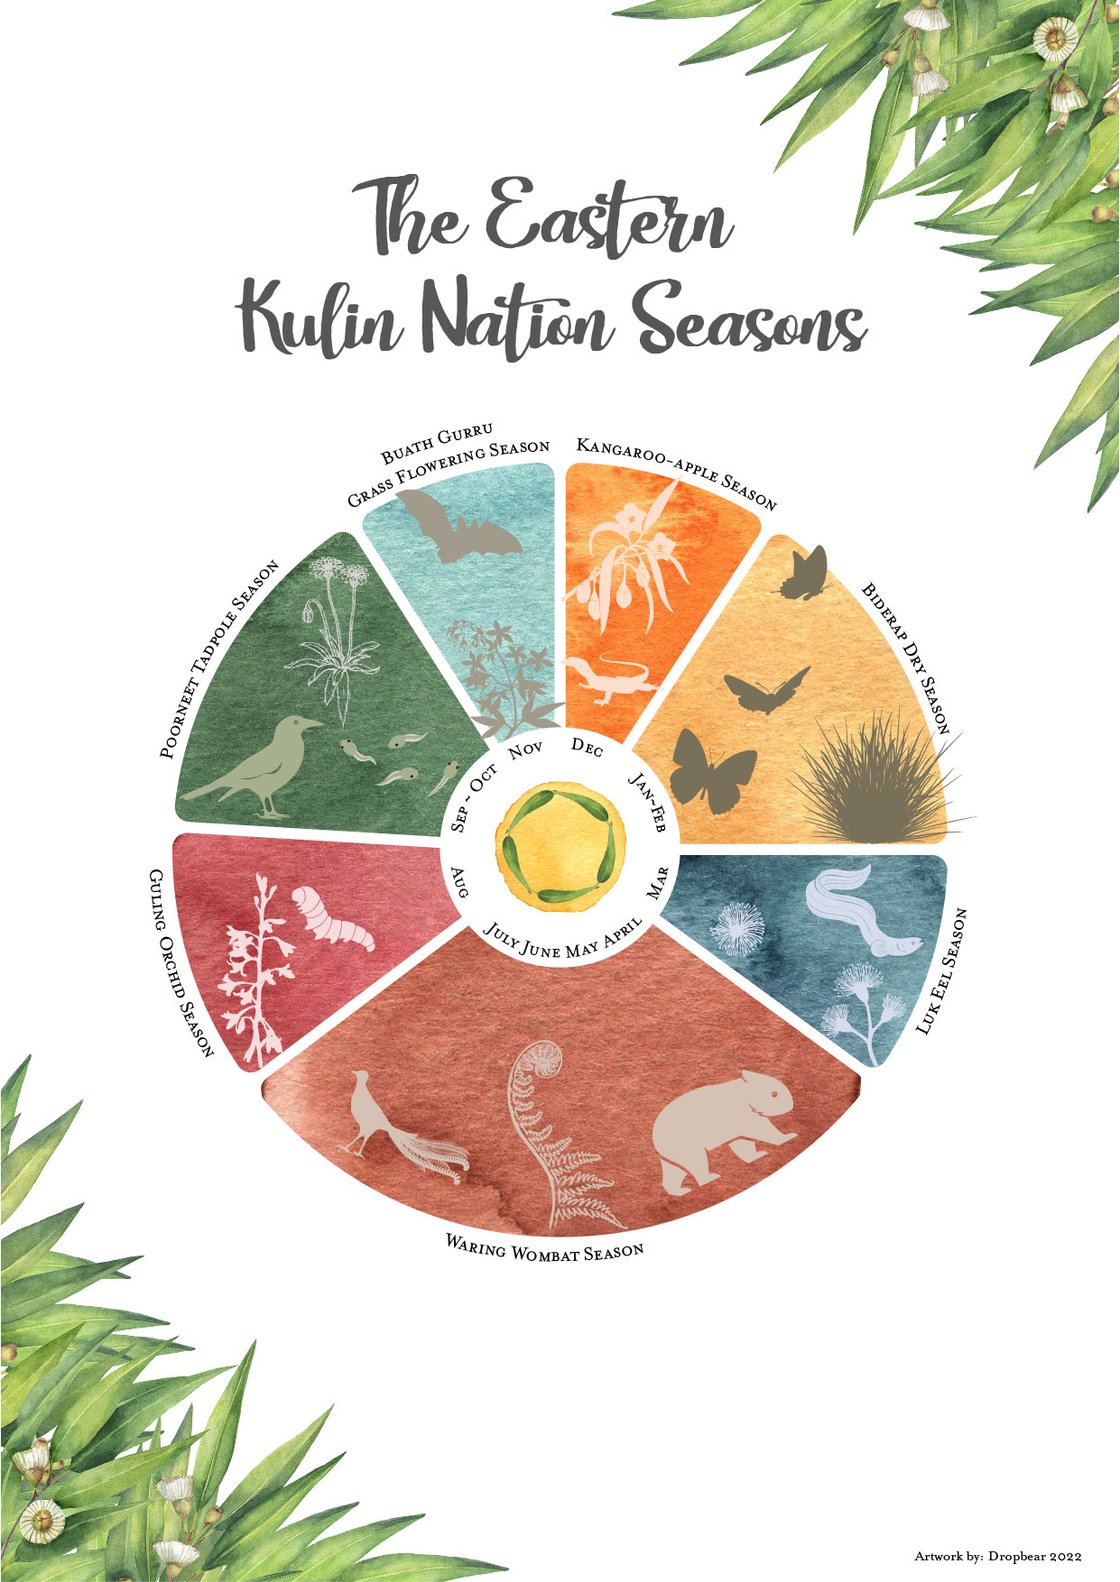 Image of The Eastern Kulin Nation Seasons A3 poster